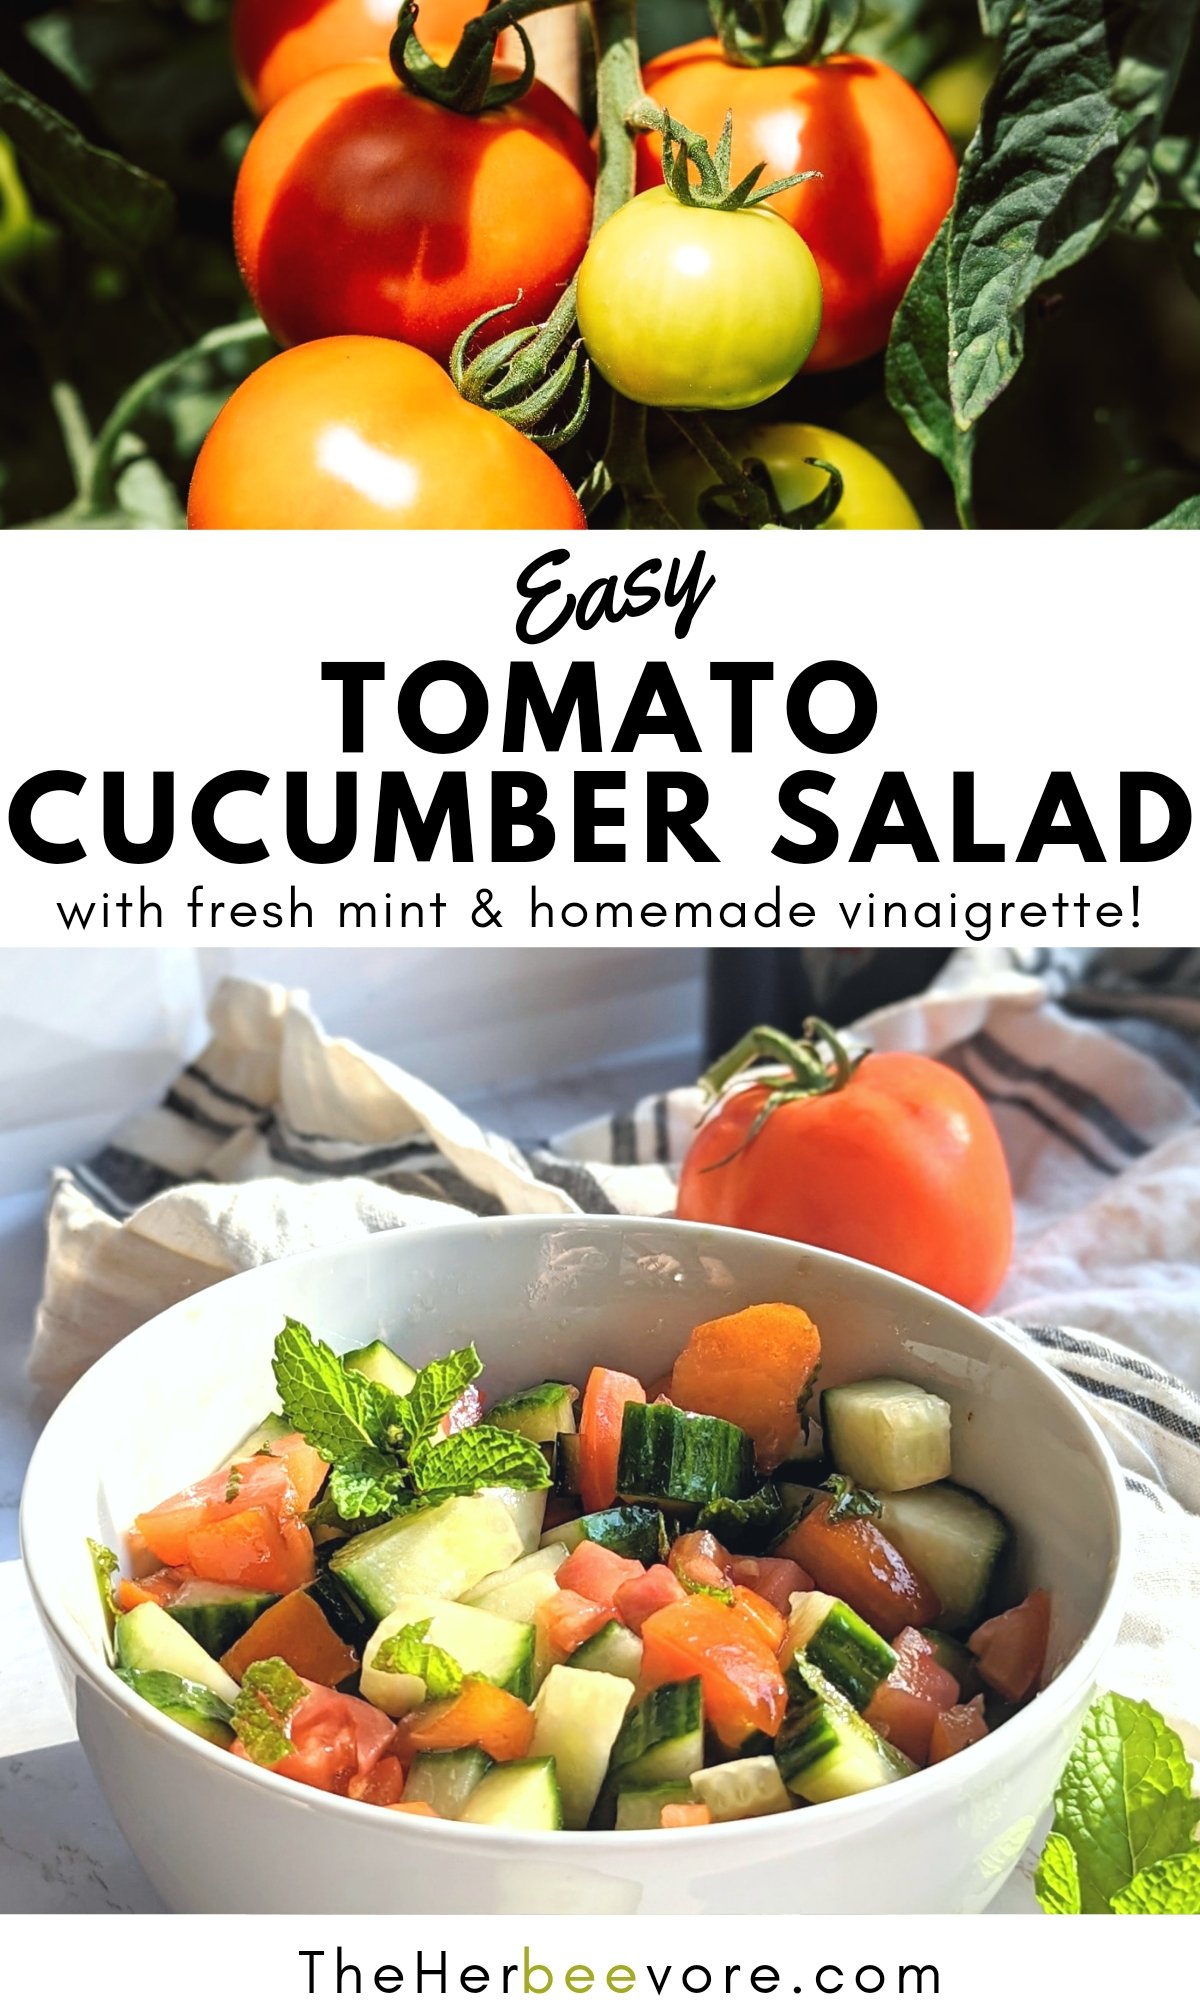 tomato cucumber salad with mint recipe garden tomato recipes what to do with too many tomatoes in salad no lettuce salads